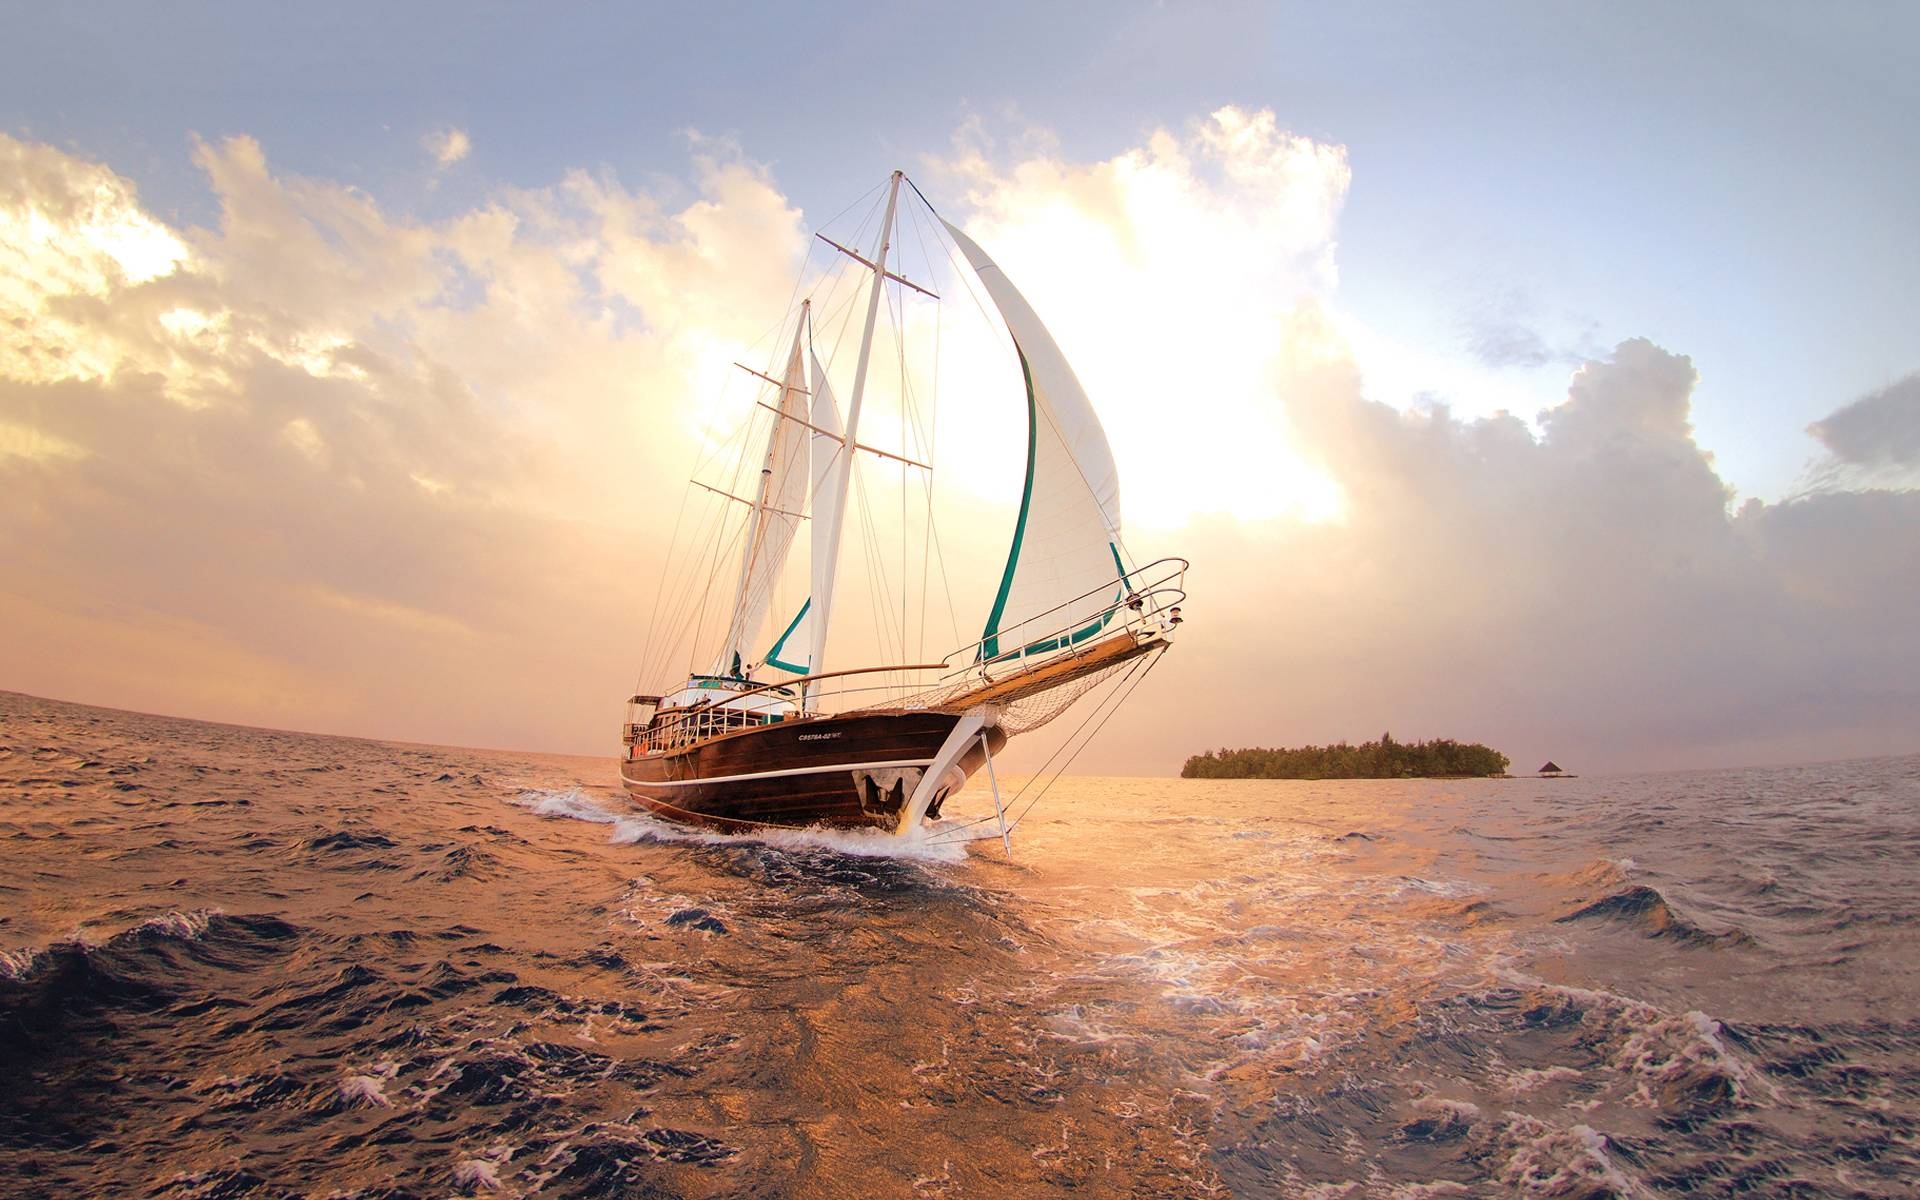 Sailing: Boat, The activity of traveling on the water in a ship propelled by the wind. 1920x1200 HD Wallpaper.